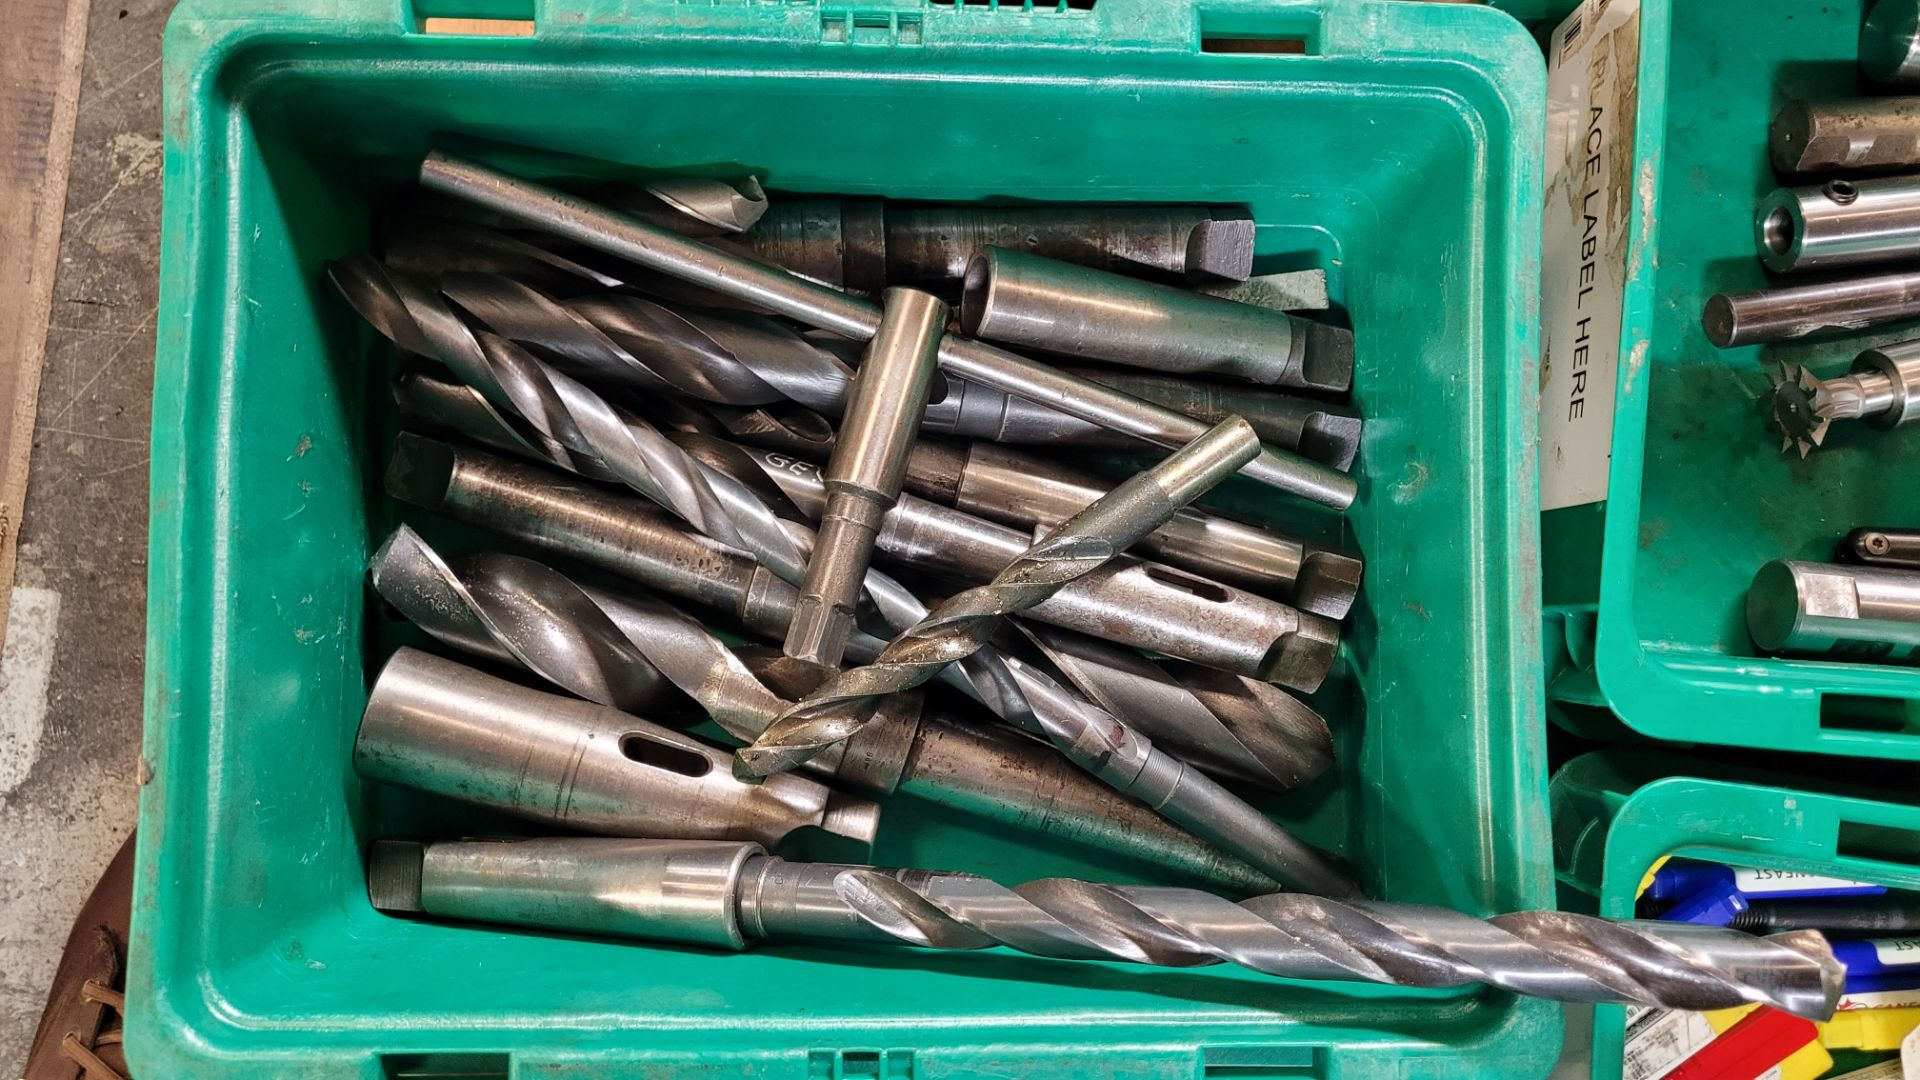 LOT OF ASST. CARBIDE CUTTING INSERTS, BORING BARS, CUTTING TOOLS, DRILL BITS, ETC. - Image 6 of 8